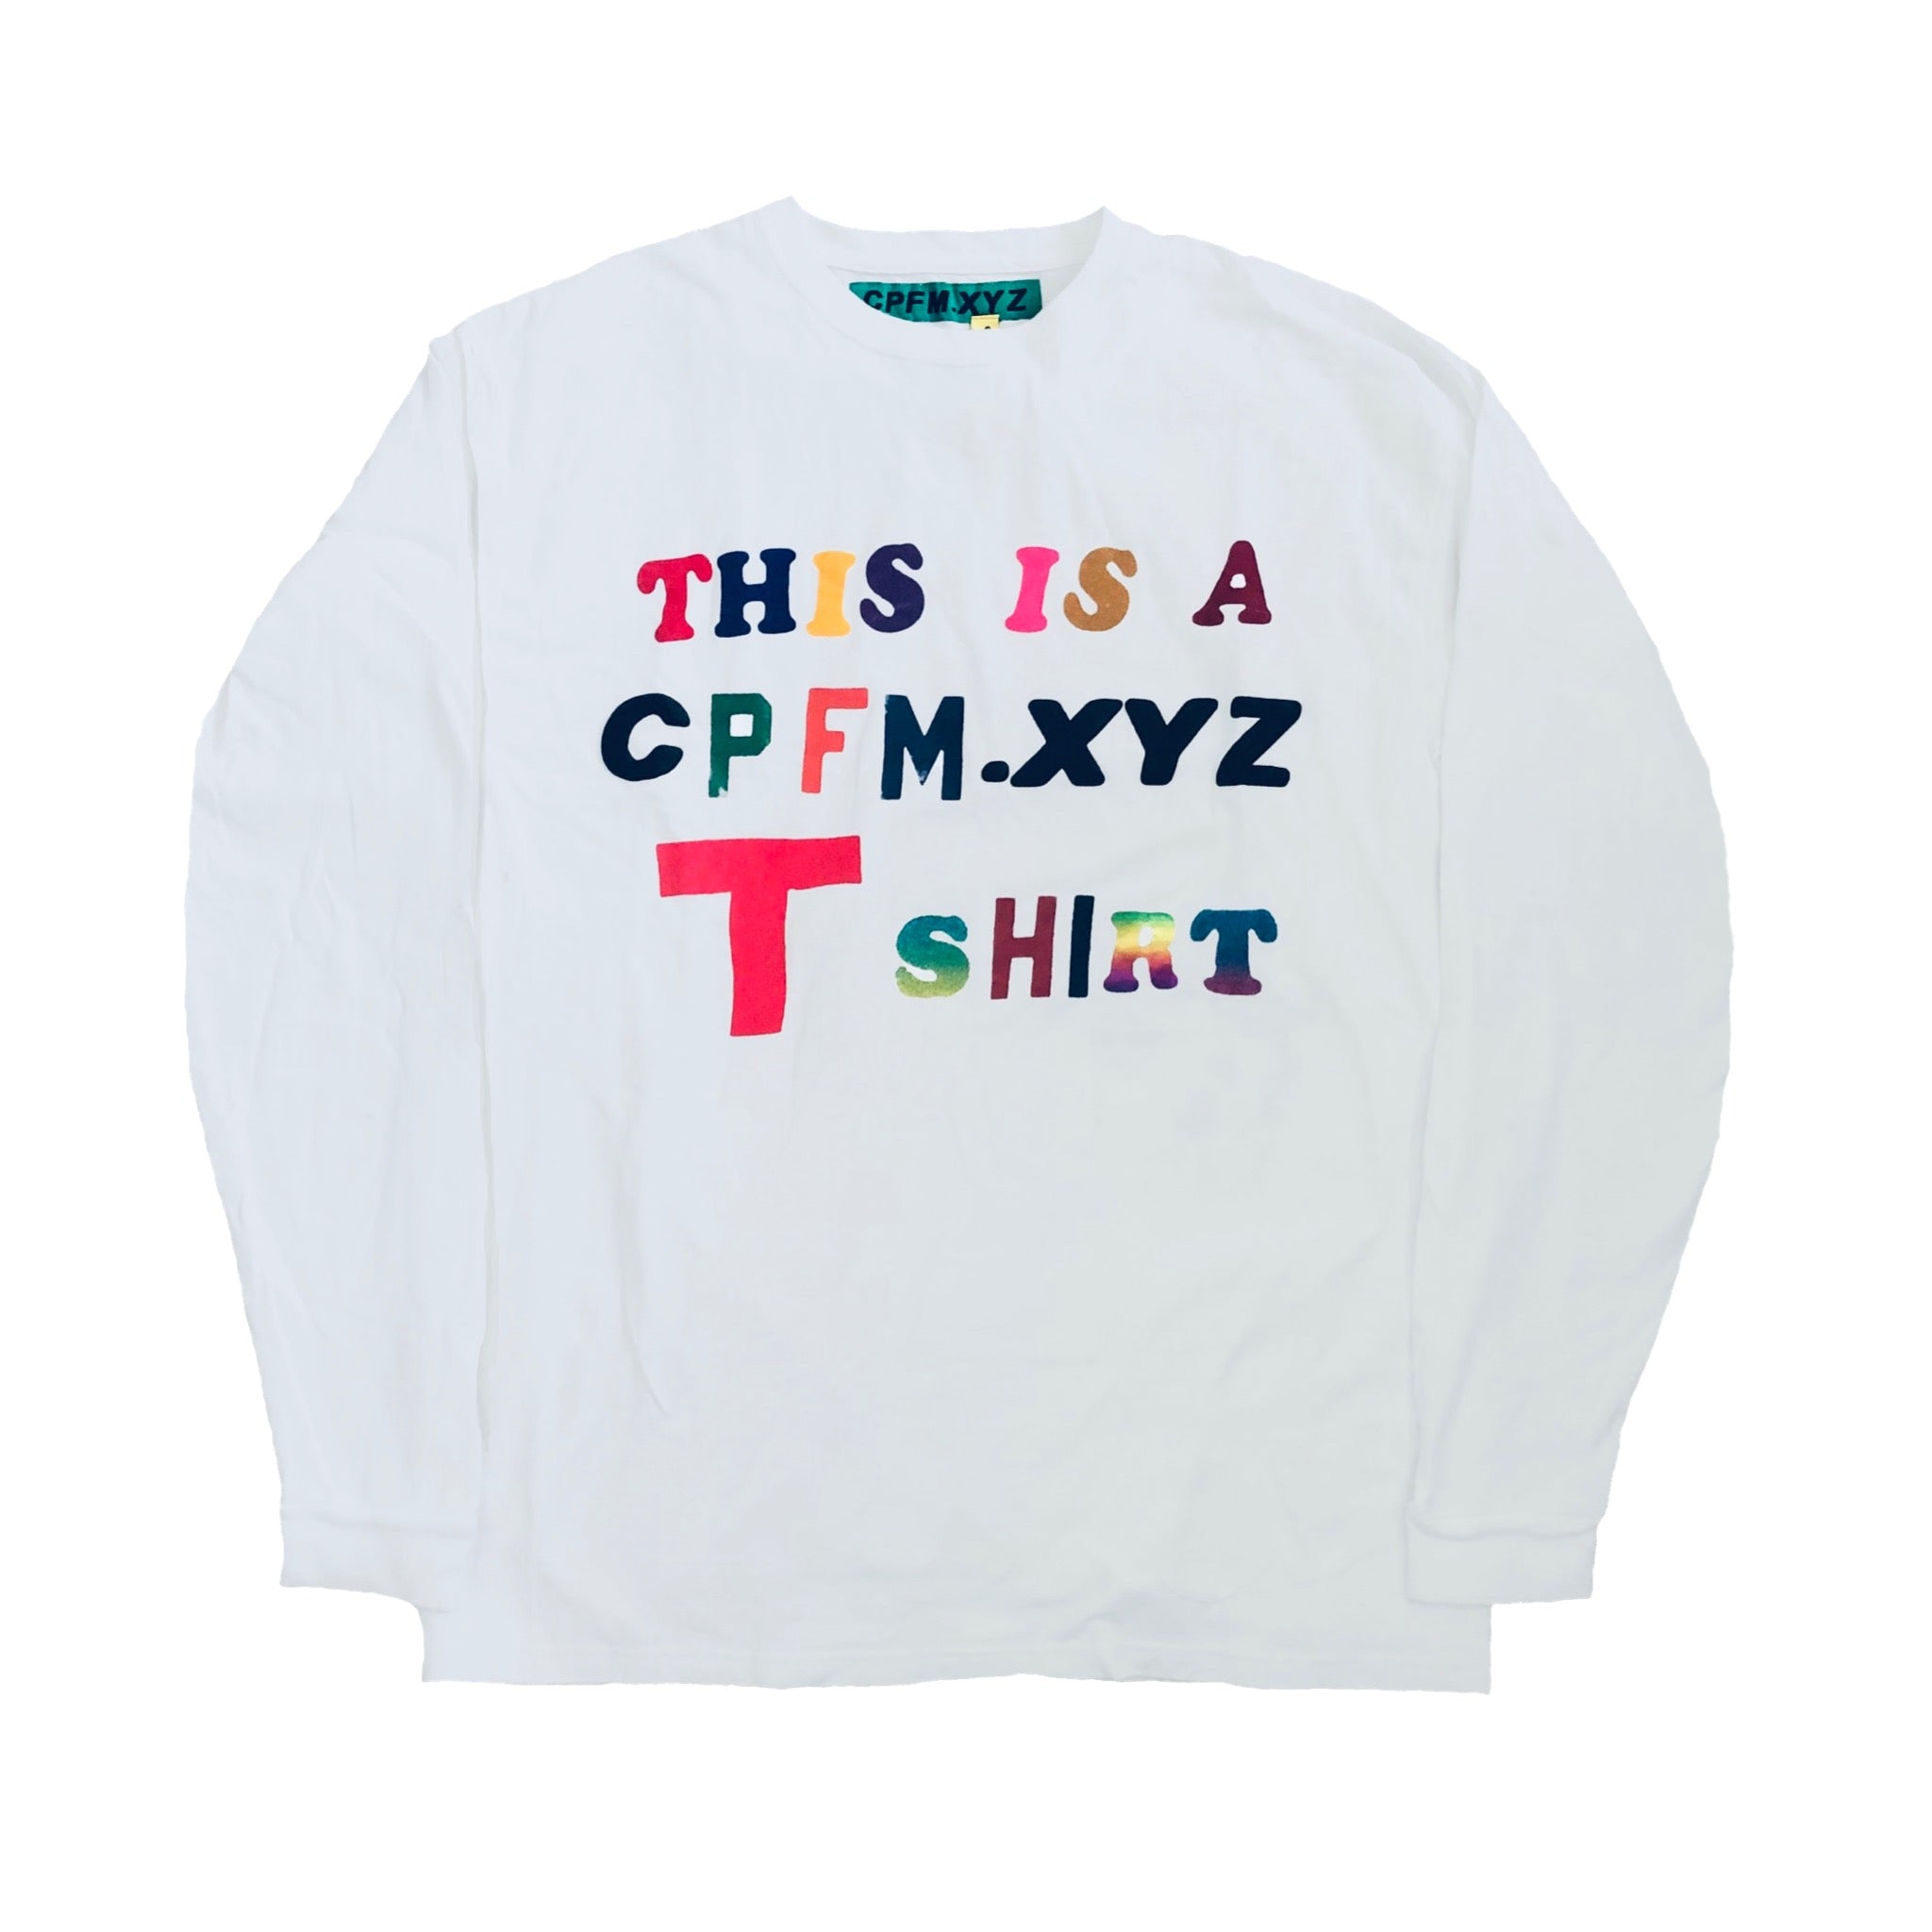 THIS IS A CPFM.XYZ T SHIRT\